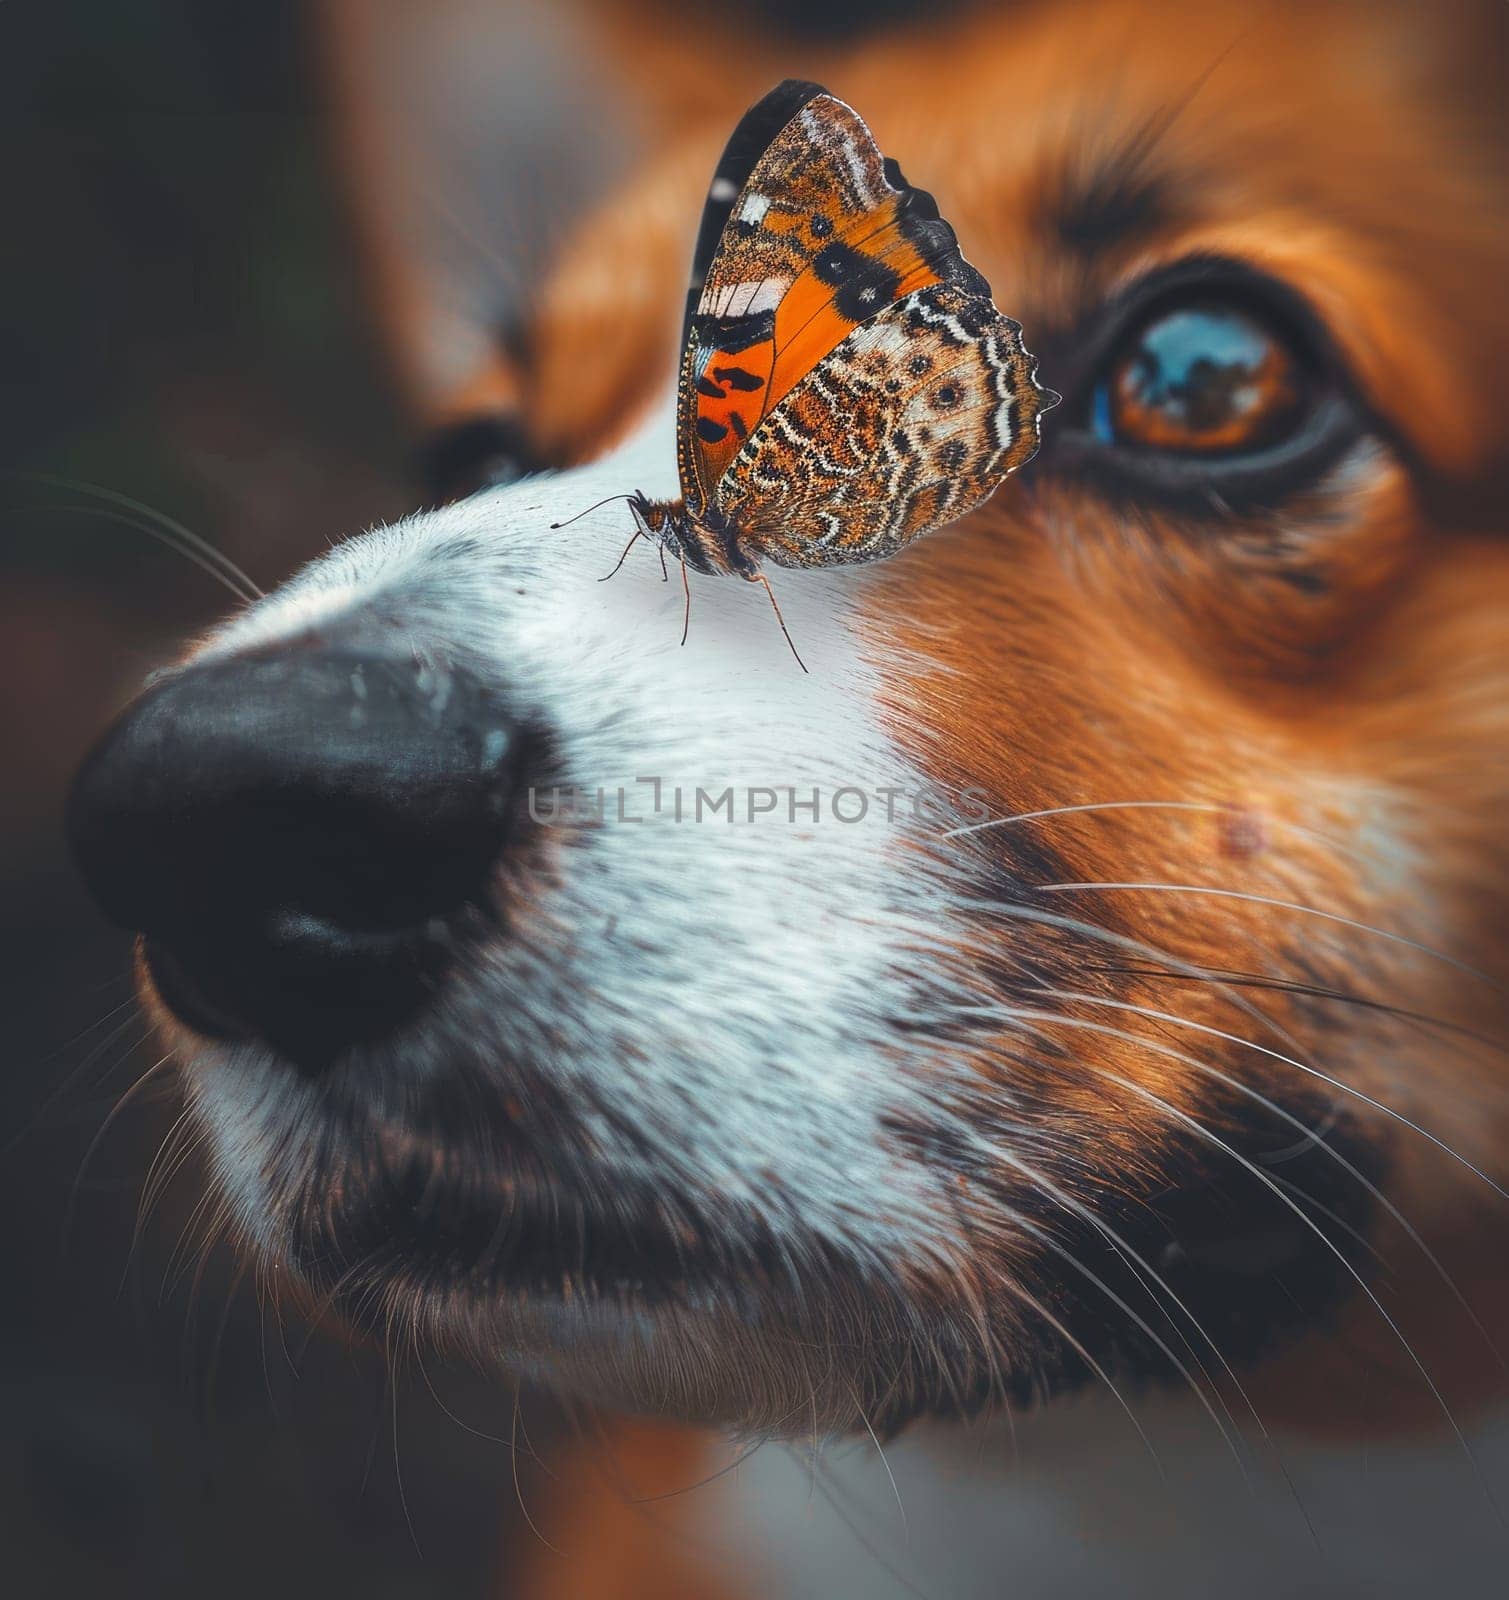 A butterfly with wings like stained glass perches on a corgi dog's nose, a soft blur of fur and eyes in the background. This moment captures a poetic and delicate interaction.. by sfinks